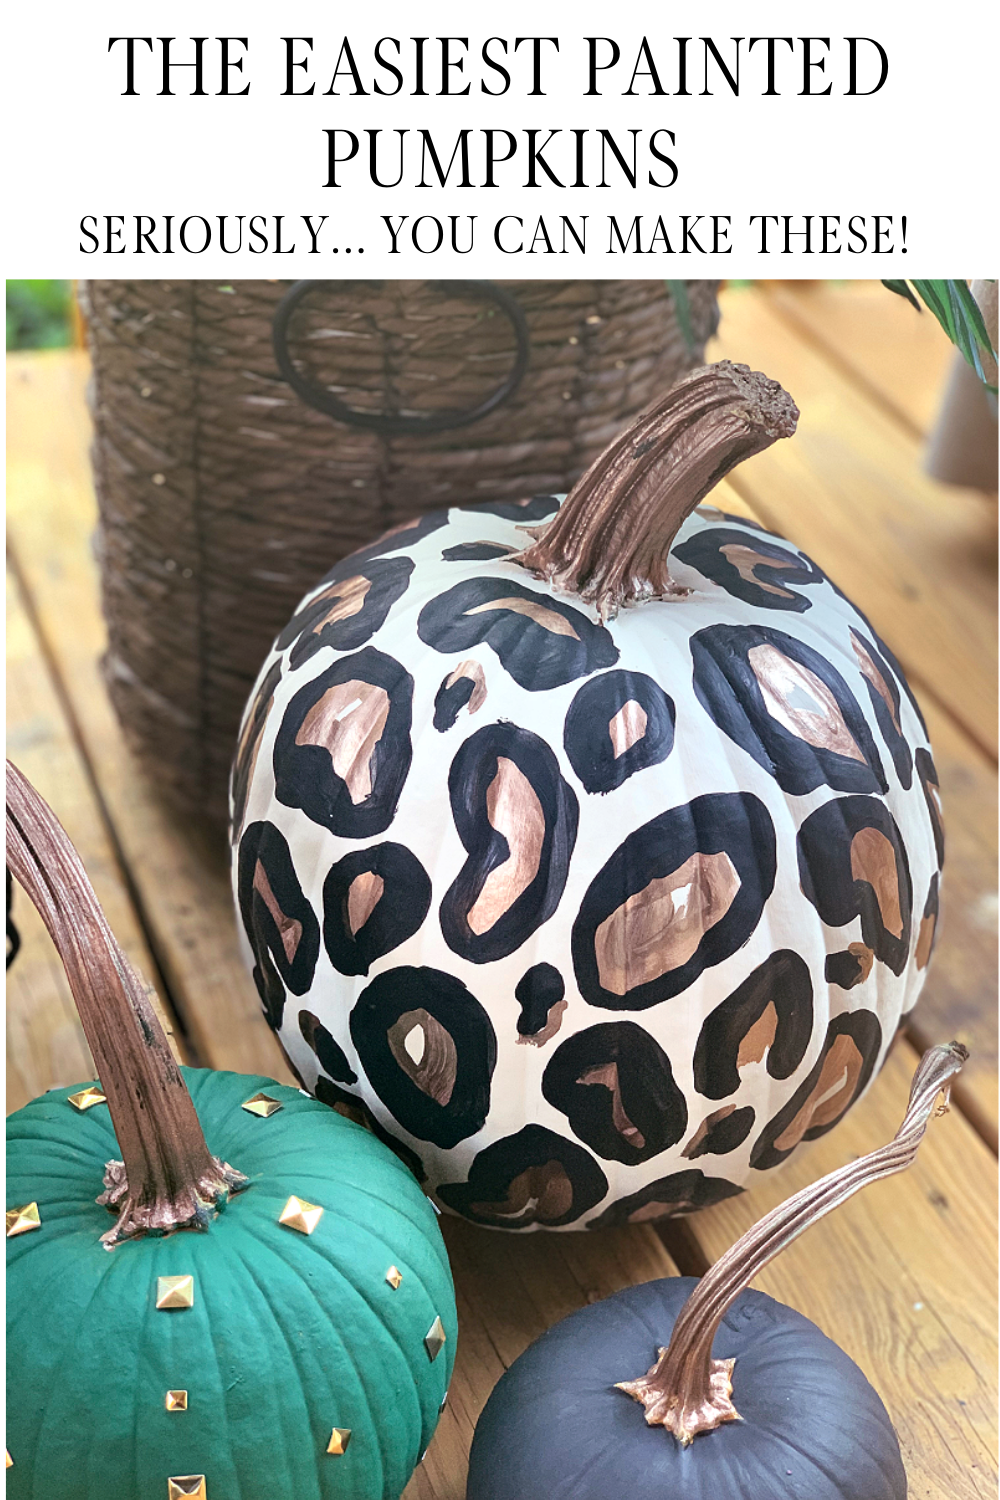 The easiest painted pumpkins. You can totally make these. Yes, even the leopard pumpkin! 